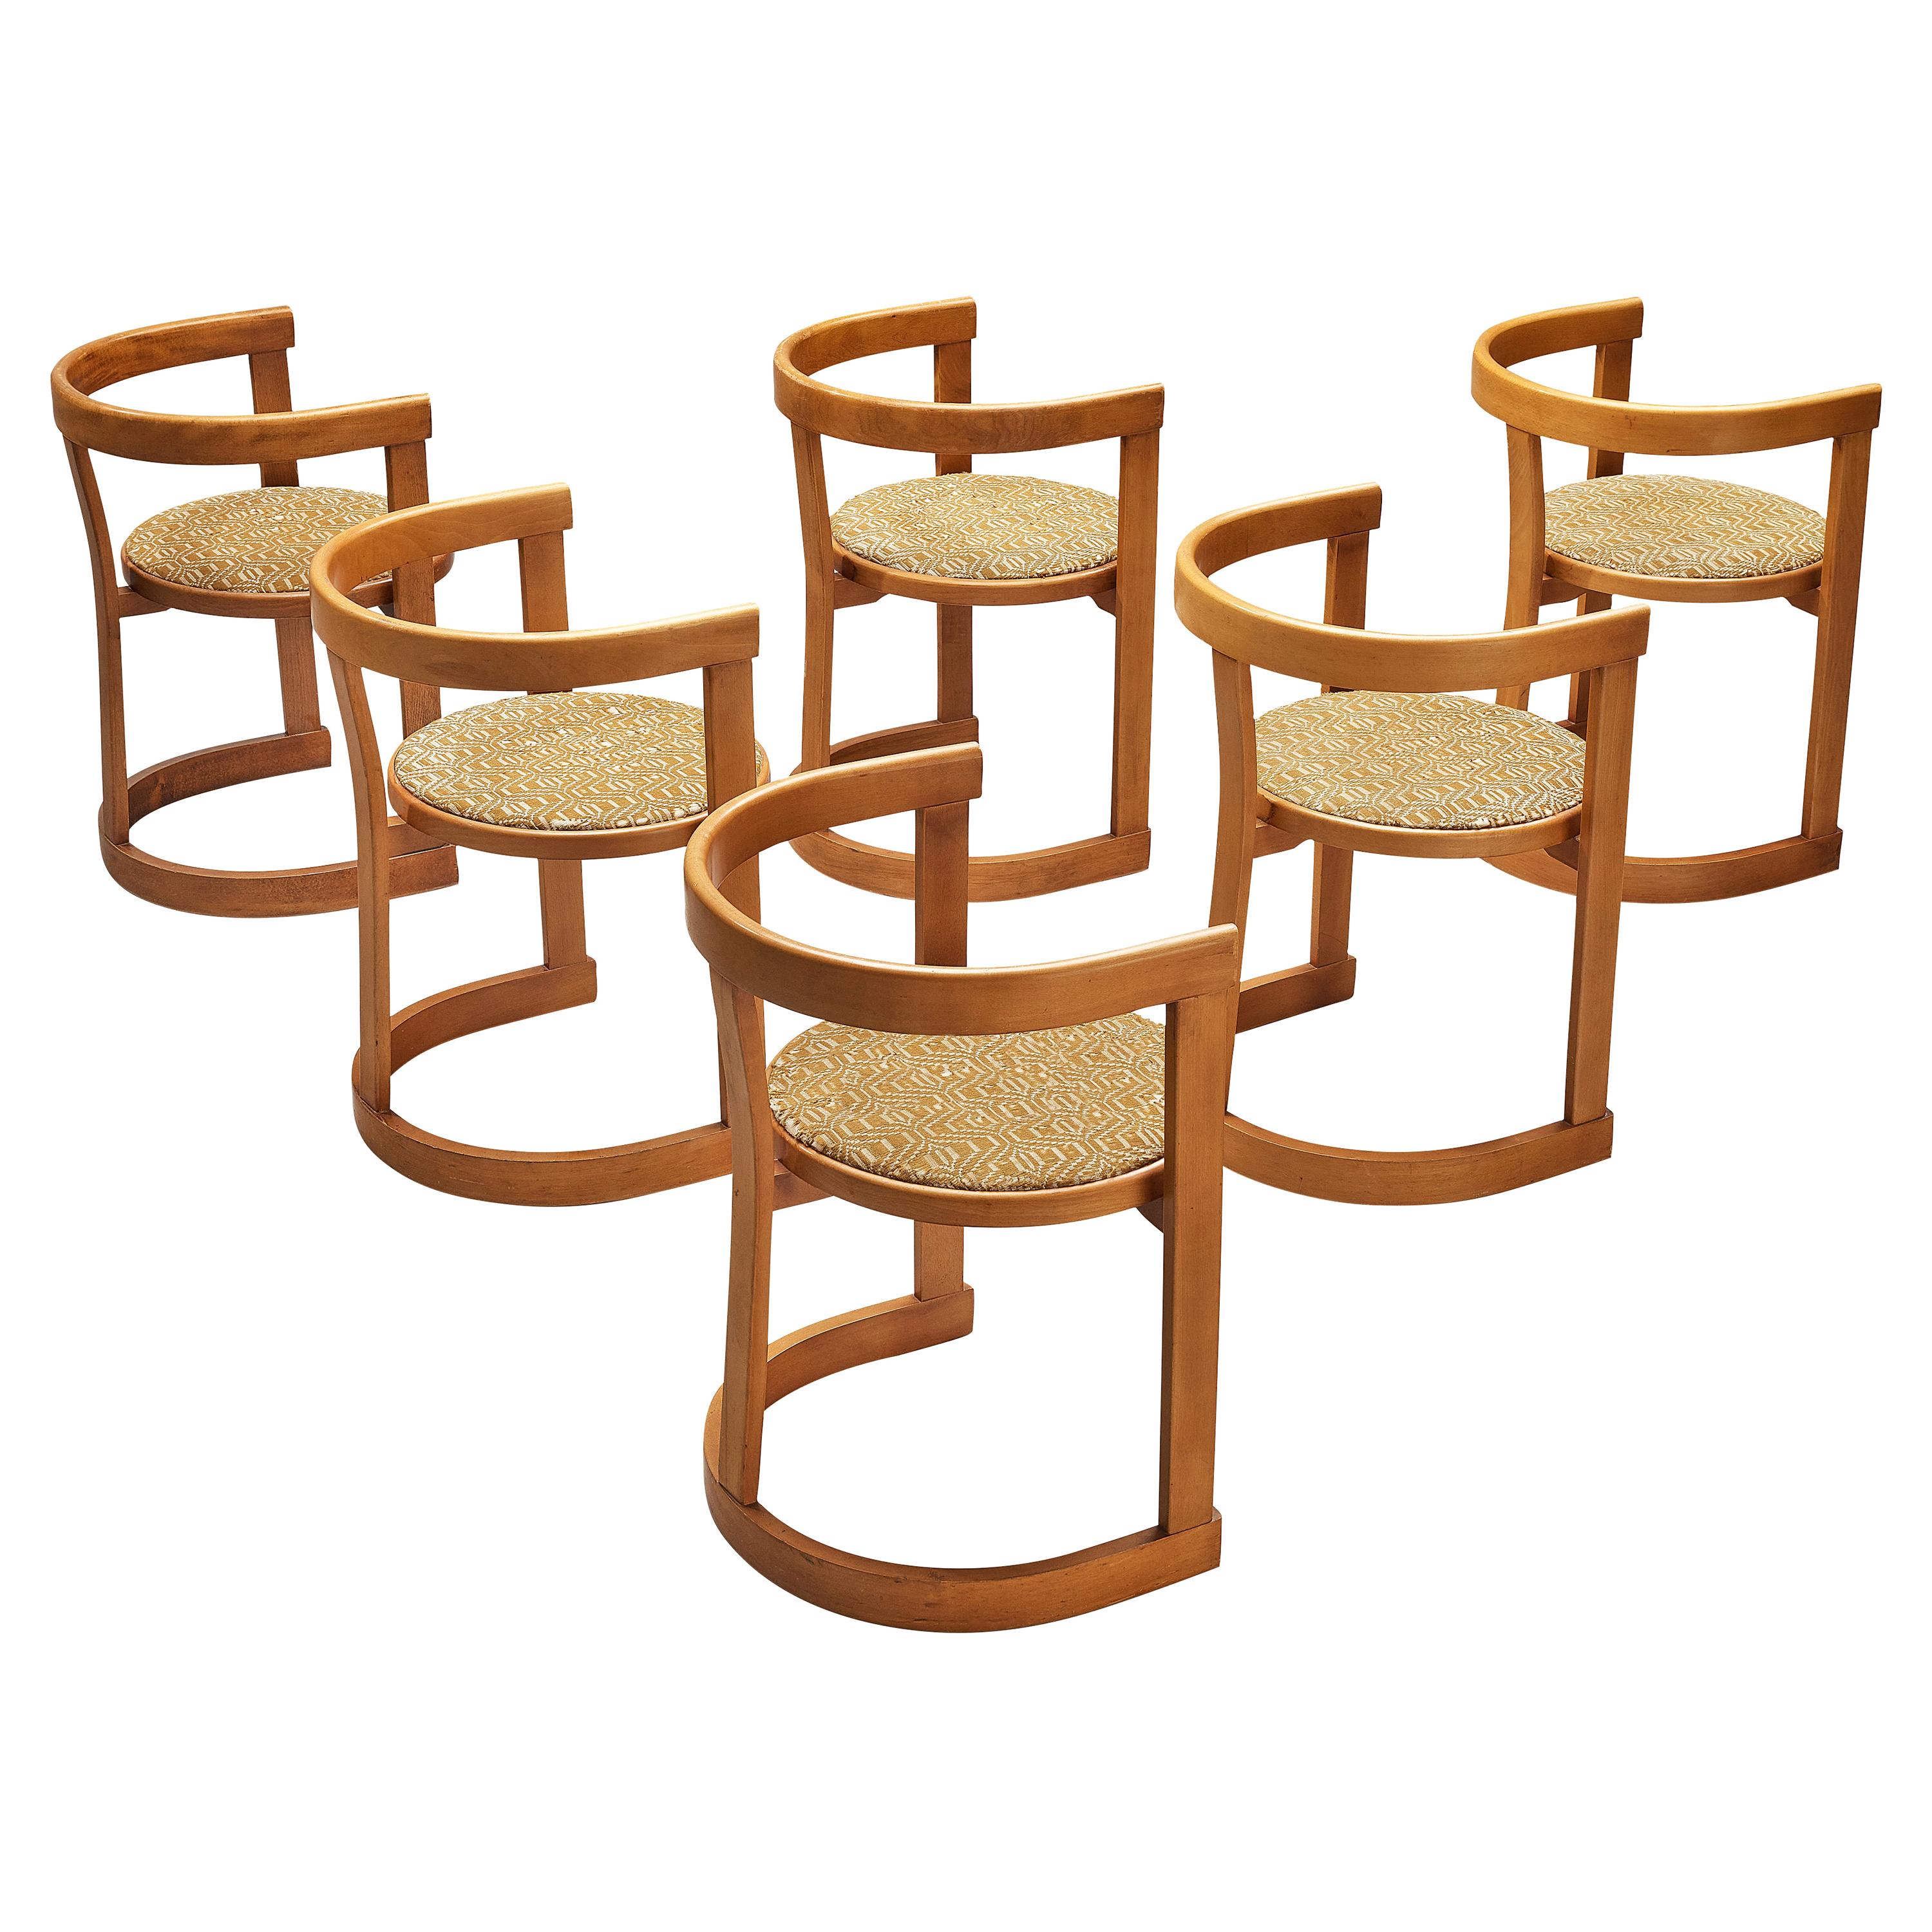 Set of 6 Italian Dining Chairs in Beech and Fabric Upholstery